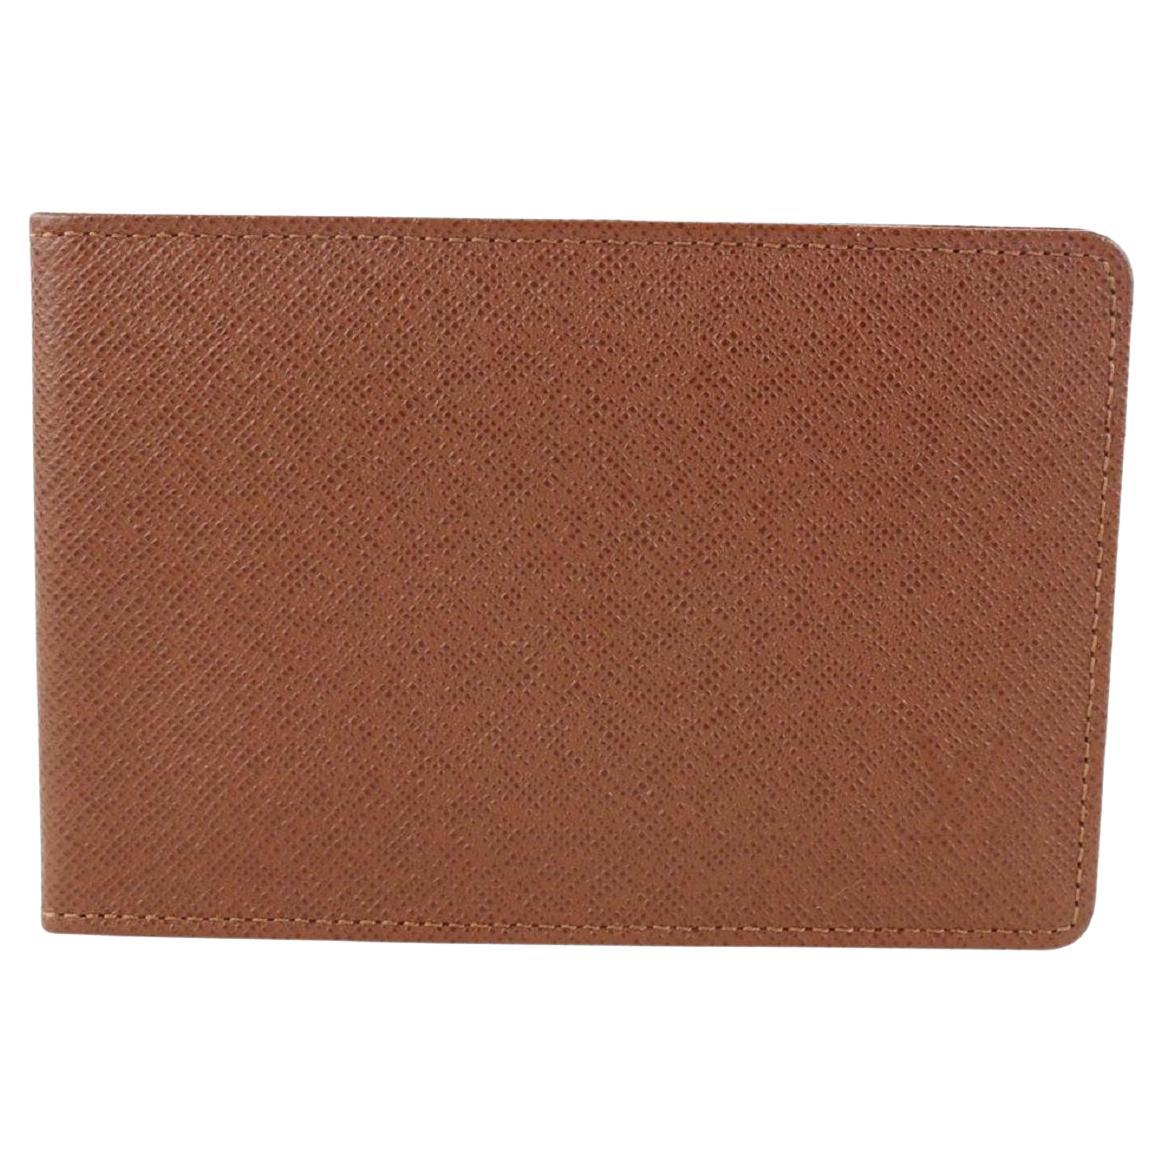 Louis Vuitton Brown Taiga Leather Card Holder ID Cas Wallet 551lvs611 For Sale